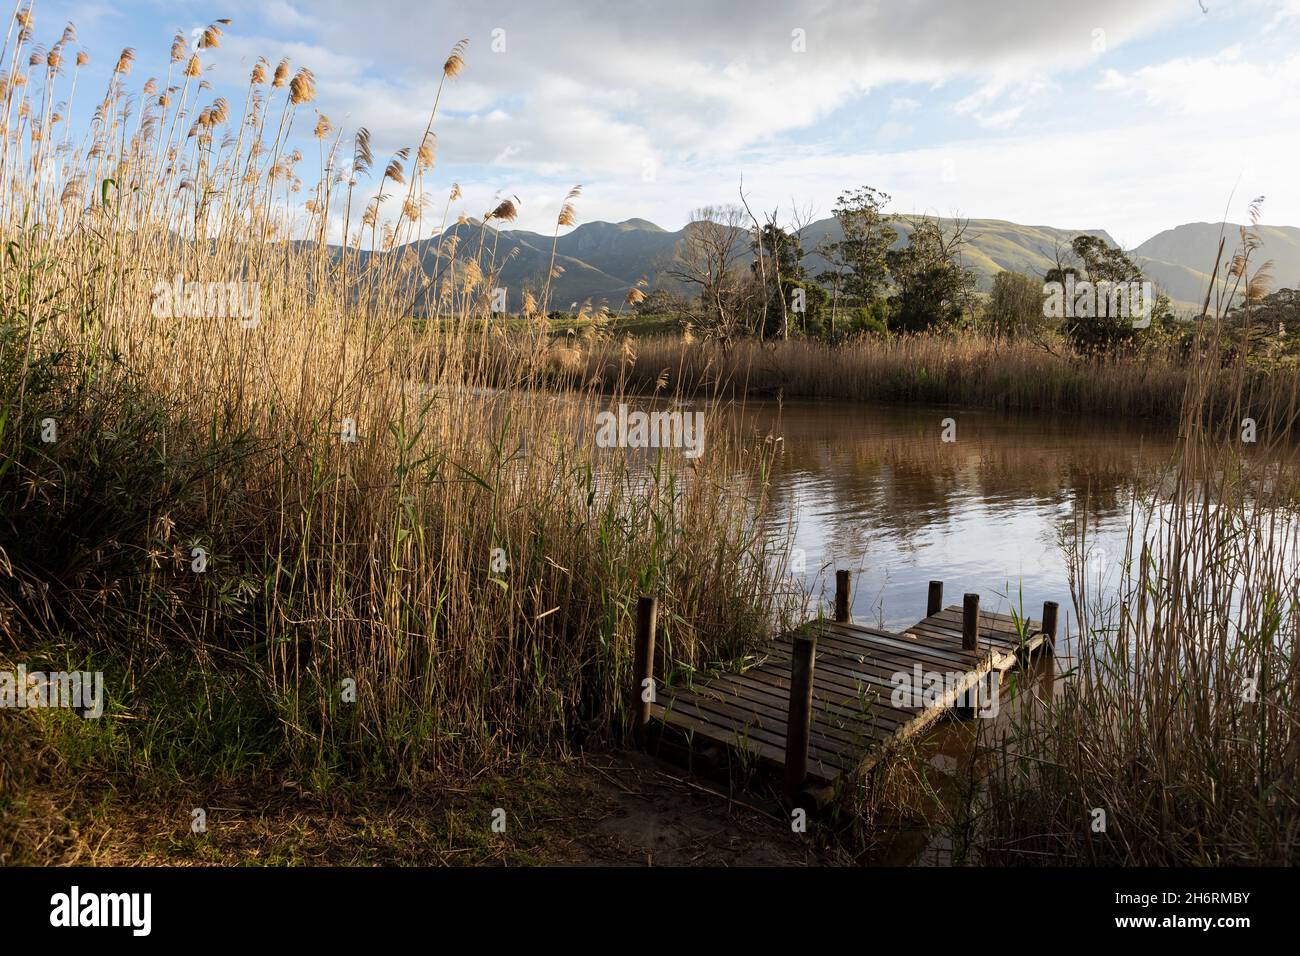 A wooden jetty on a river bank, tall reeds and grasses. Stock Photo